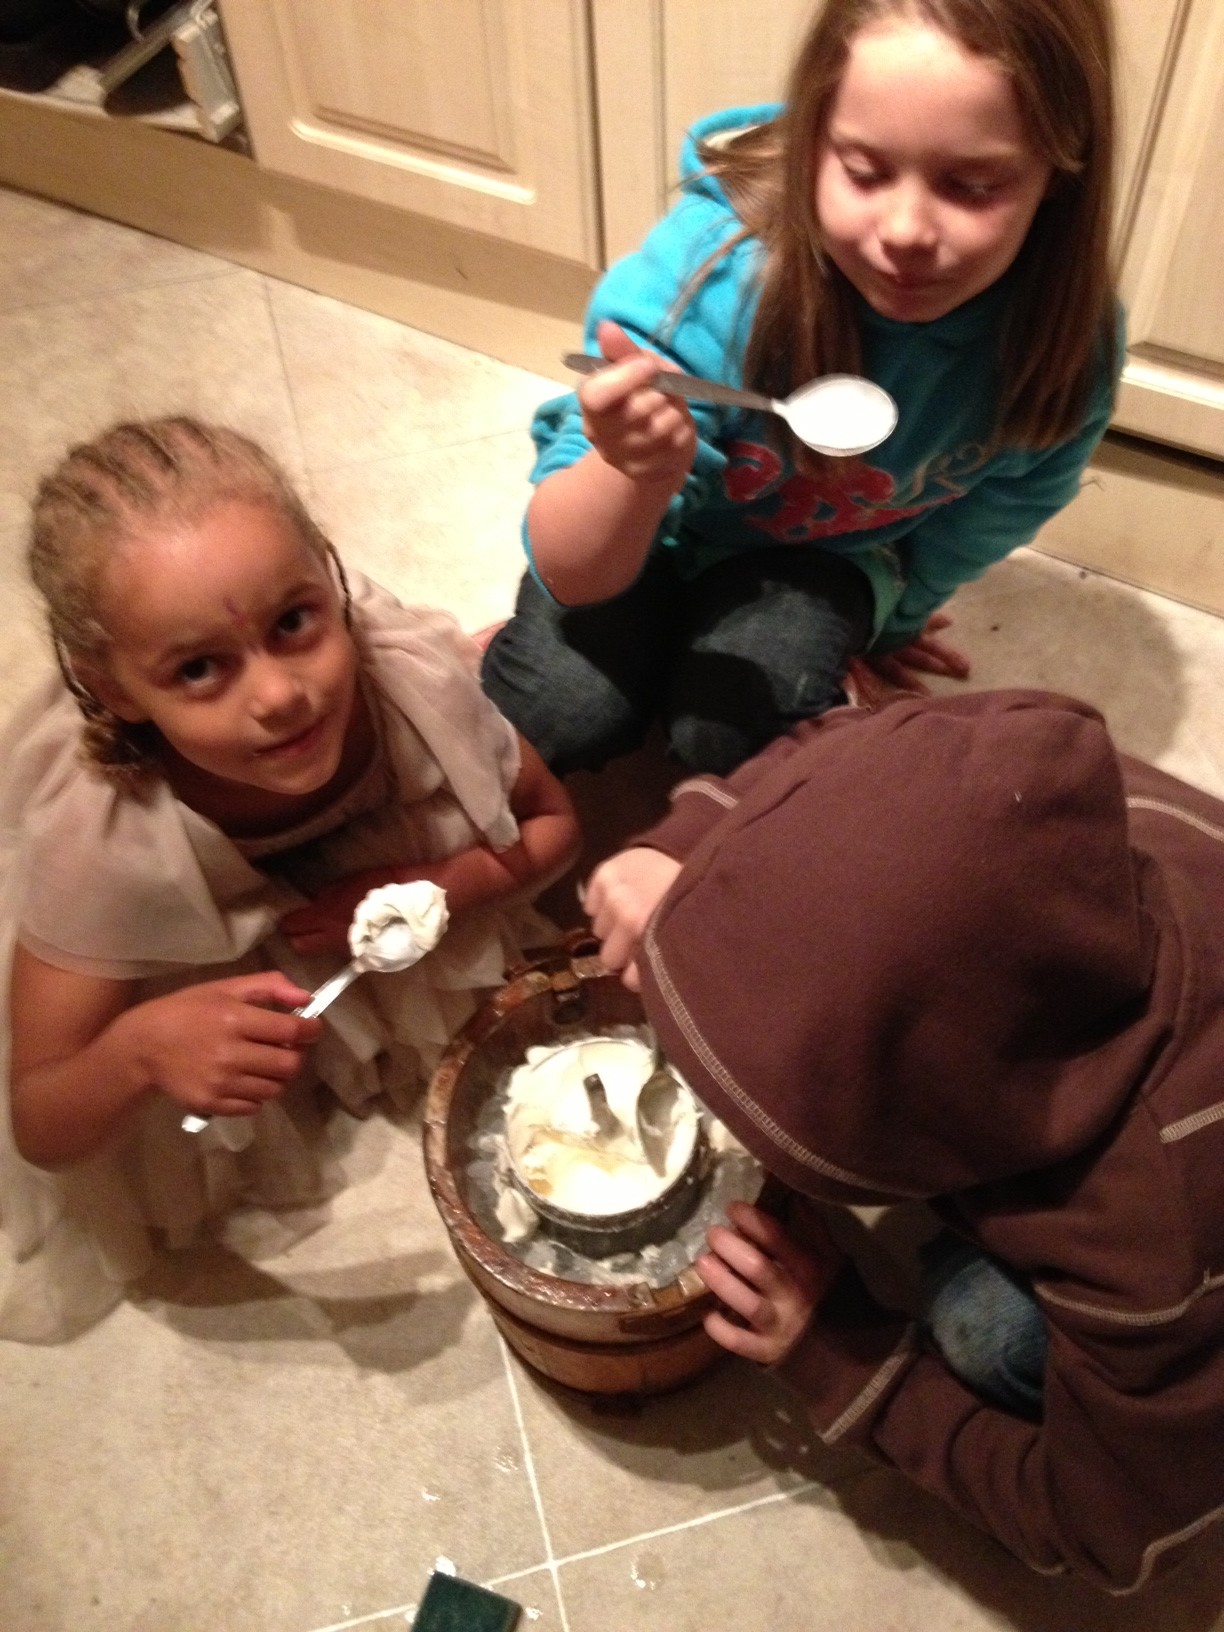 Honey and Ginger Ice Cream for the Kids